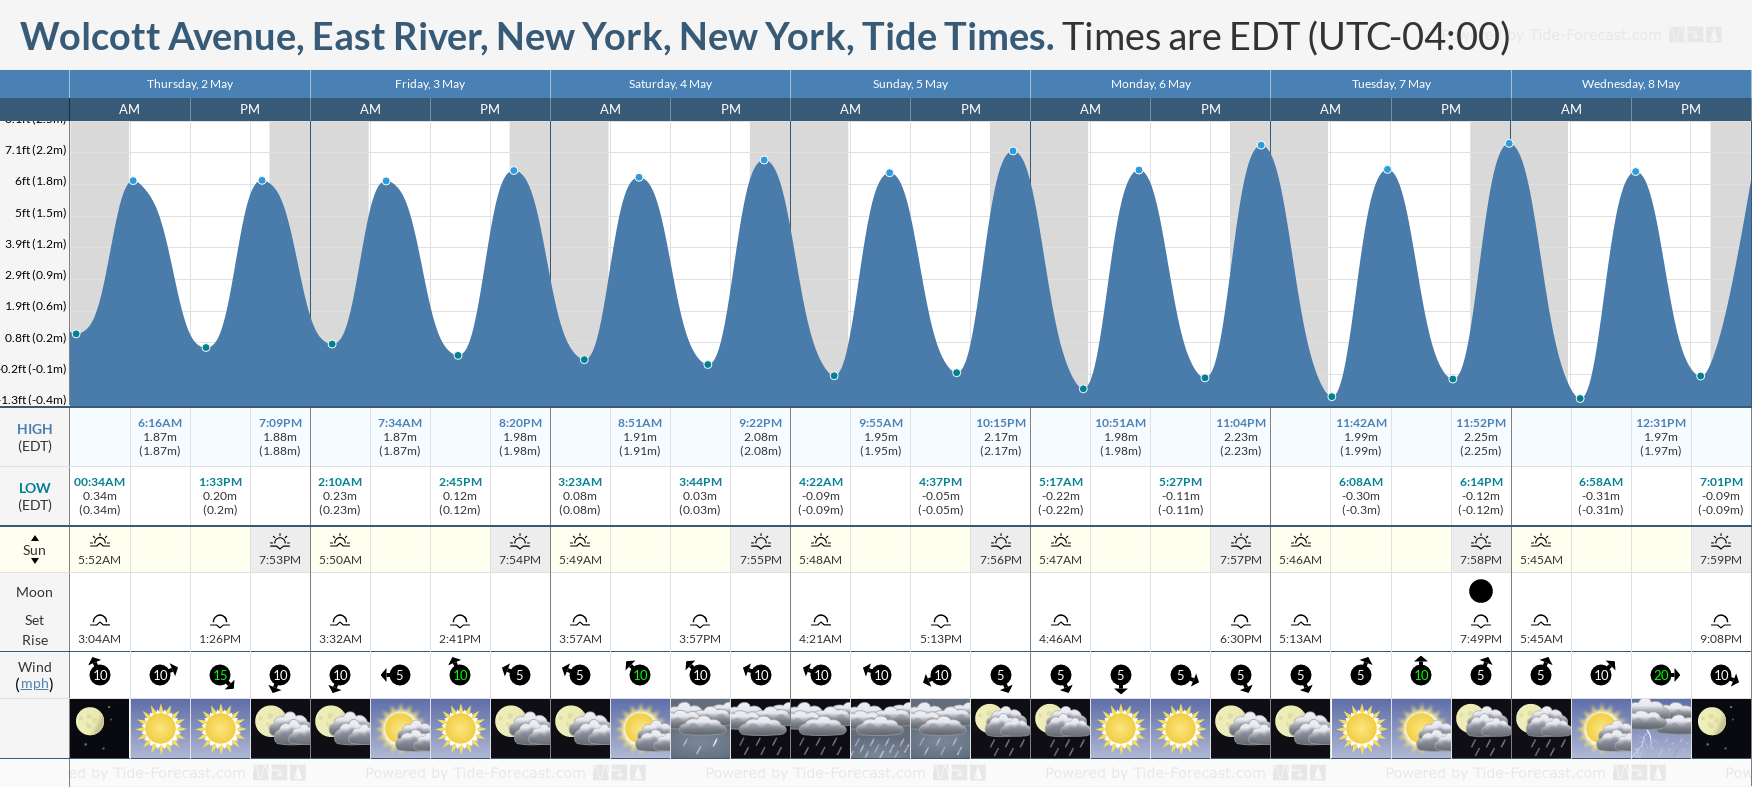 Wolcott Avenue, East River, New York, New York Tide Chart including high and low tide times for the next 7 days